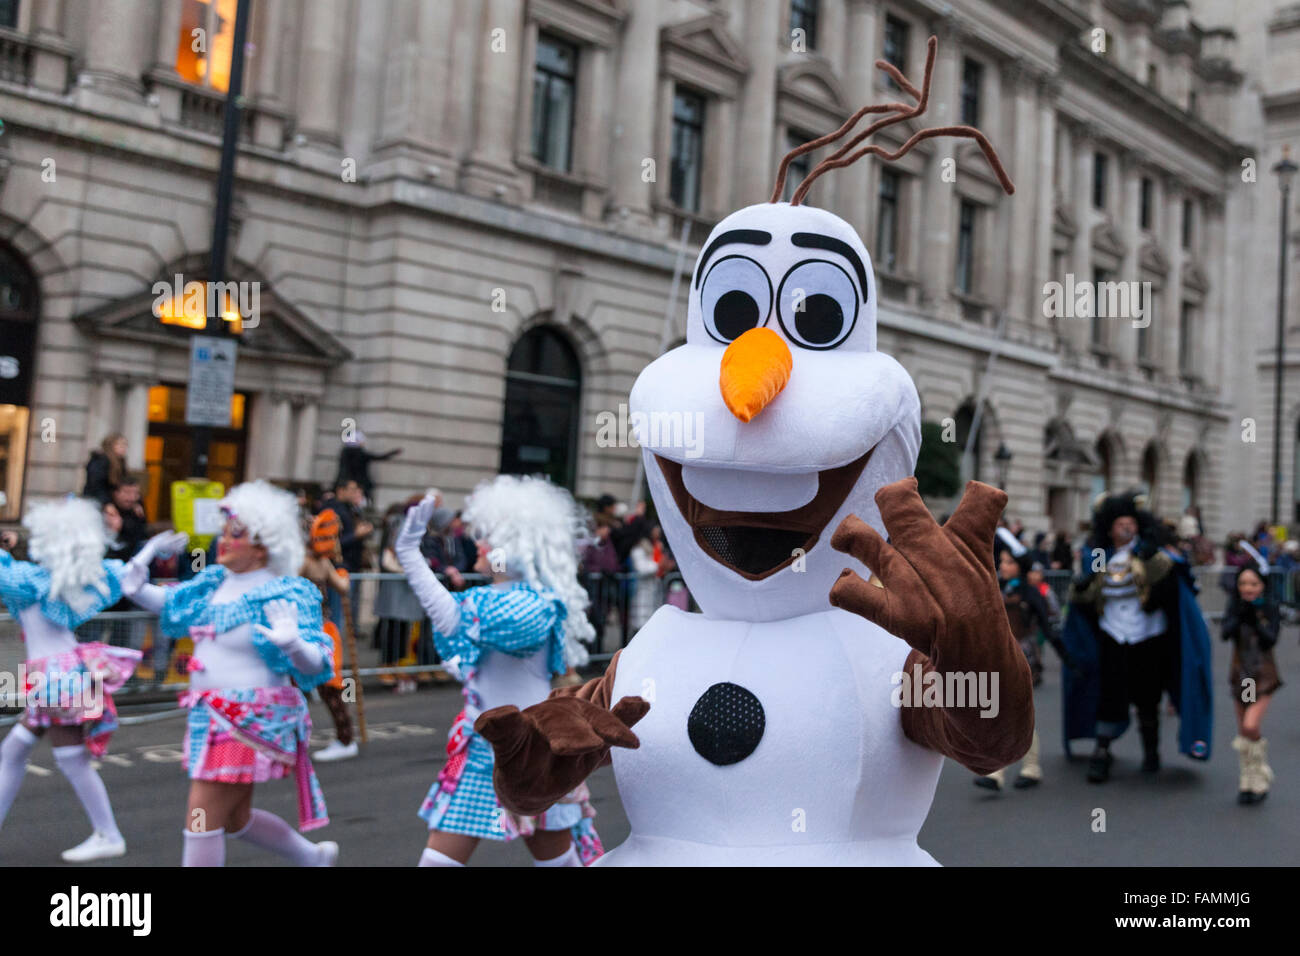 London, UK. 1st January, 2017 A Mr Snowman performer at the 30th annual London's New Year's Day Parade, LNYDP 2016. The parade has more than 8,500 performers representing 20 countries world-wide, including marching bands, cheerleaders, clowns, acrobats and representatives of the London Boroughs. Credit:  Imageplotter/Alamy Live News Stock Photo